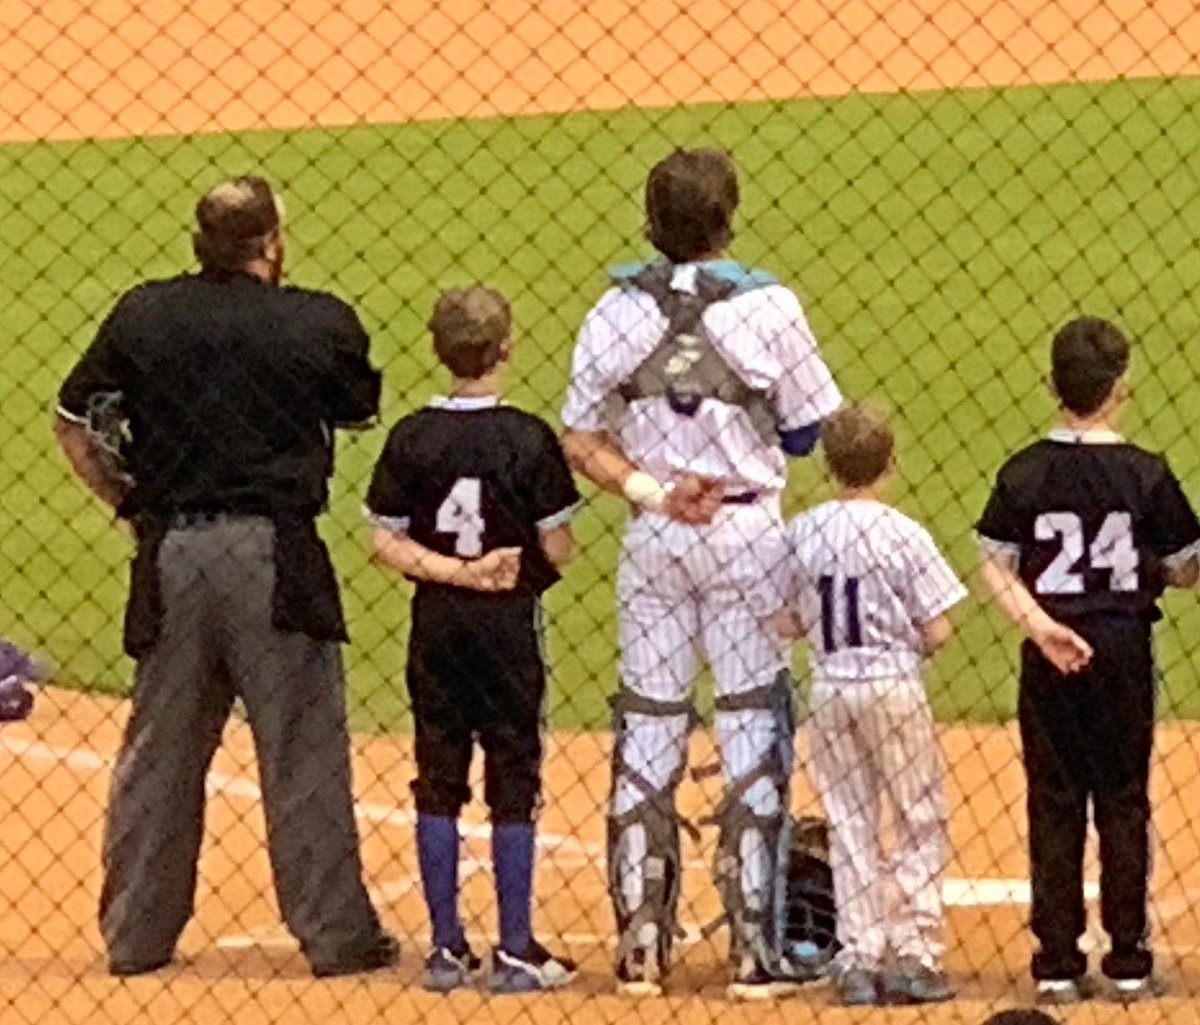 When you get to stand next to your favorite catcher for the National Anthem. #4 #futuretiger #rolemodel #Saltillotigers